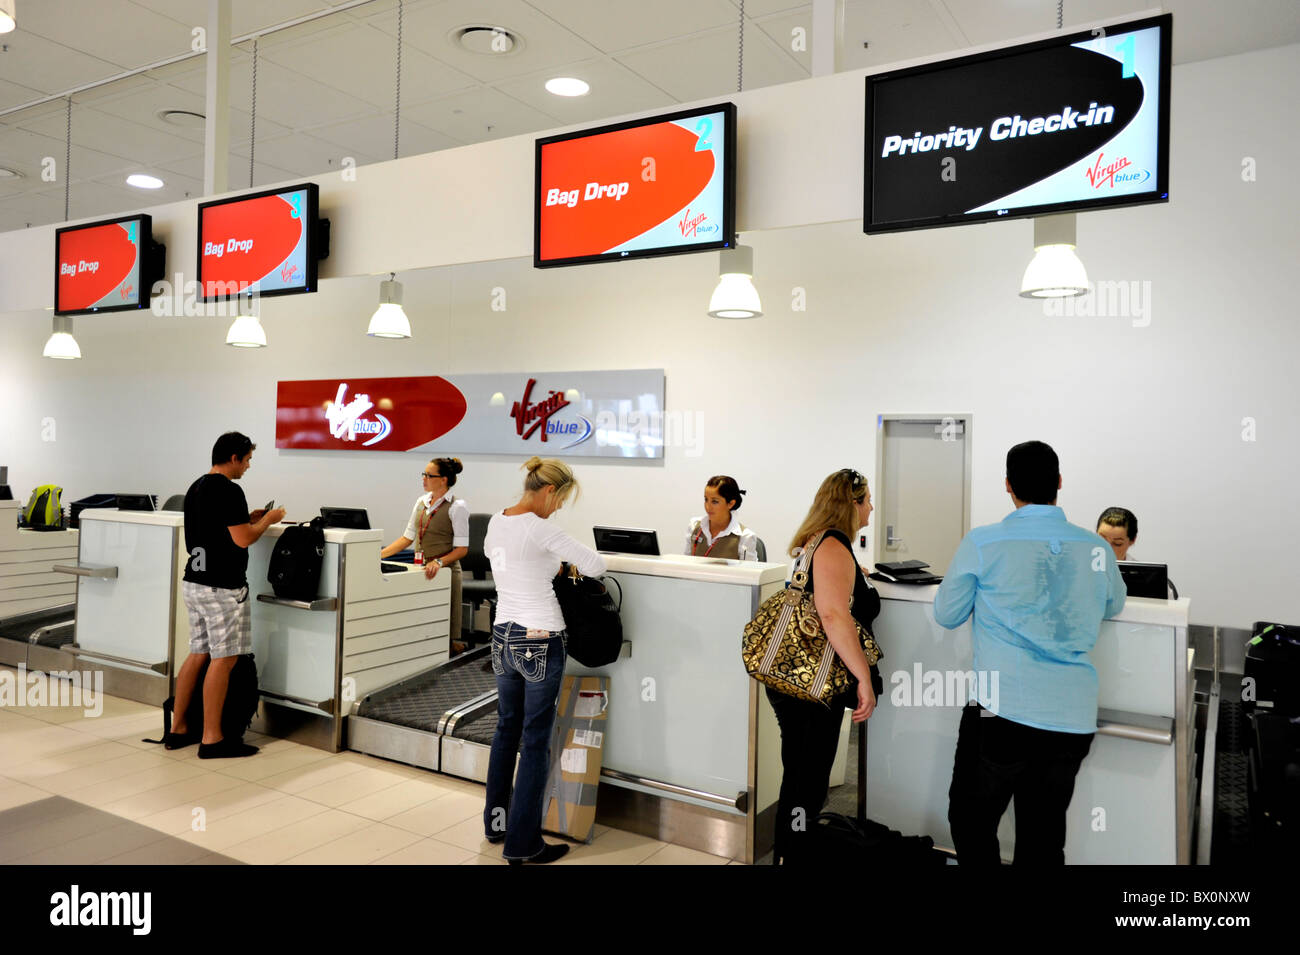 Priority Check-in at the Virgin counter at Gold Coast Airport Australia Stock Photo